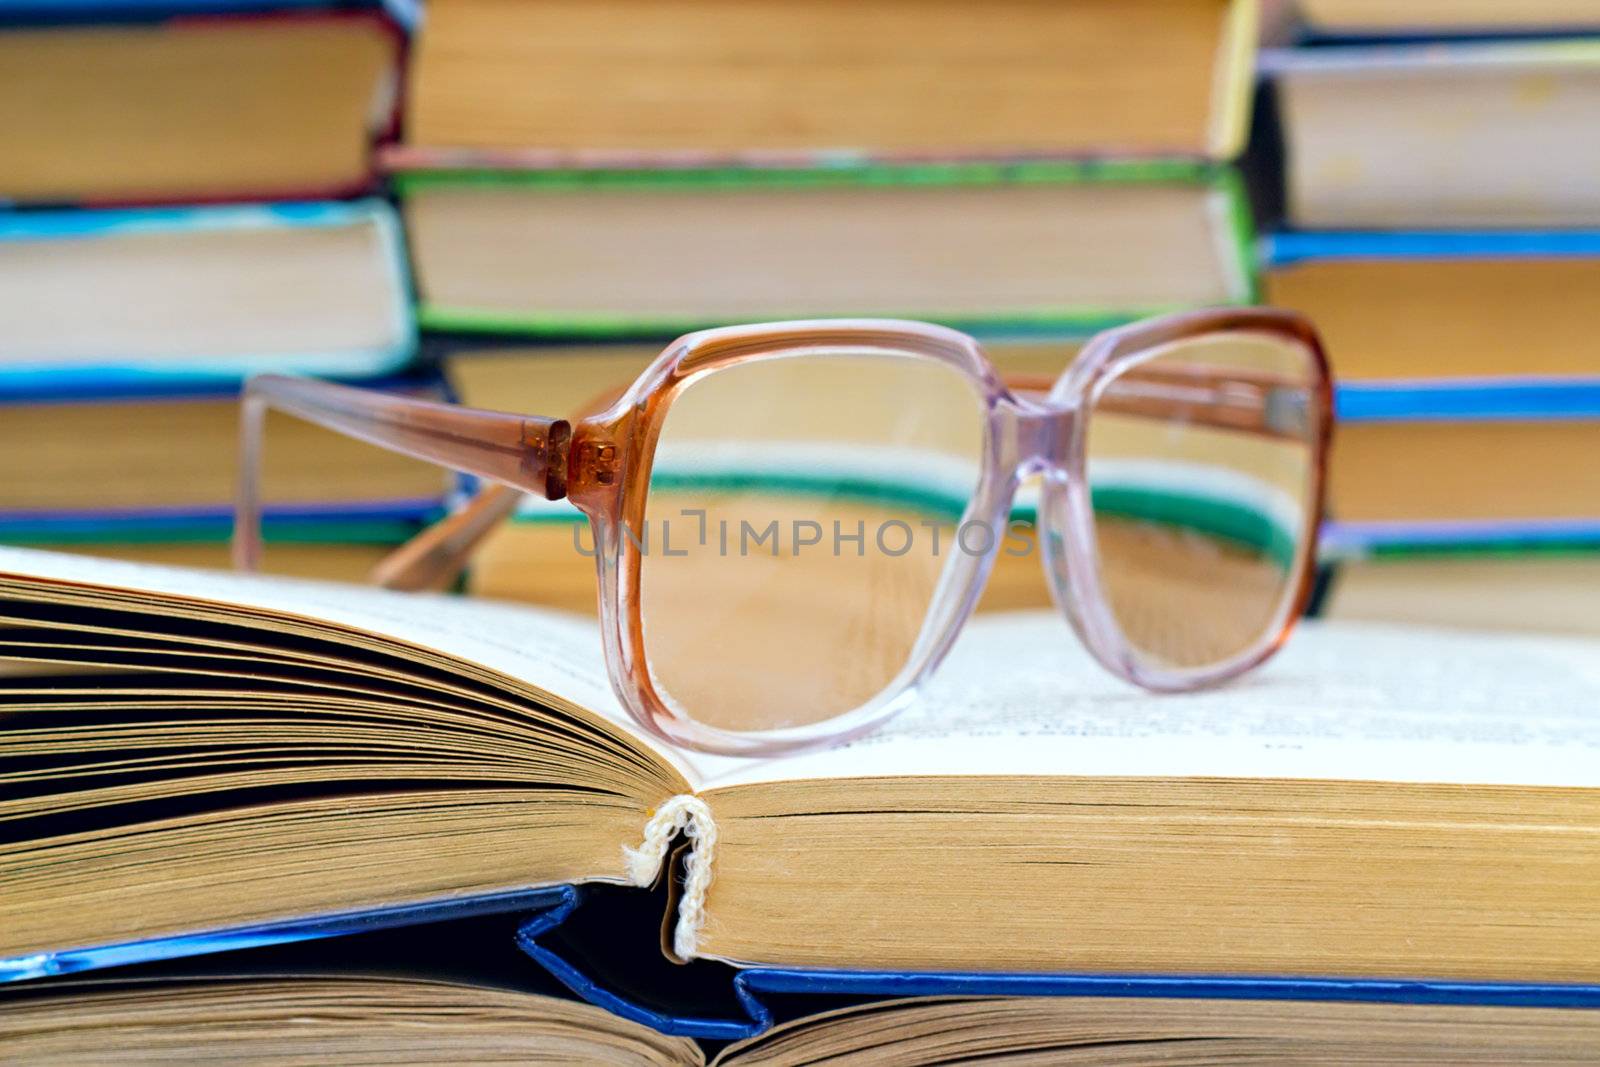 	
reading glasses lying on the open book